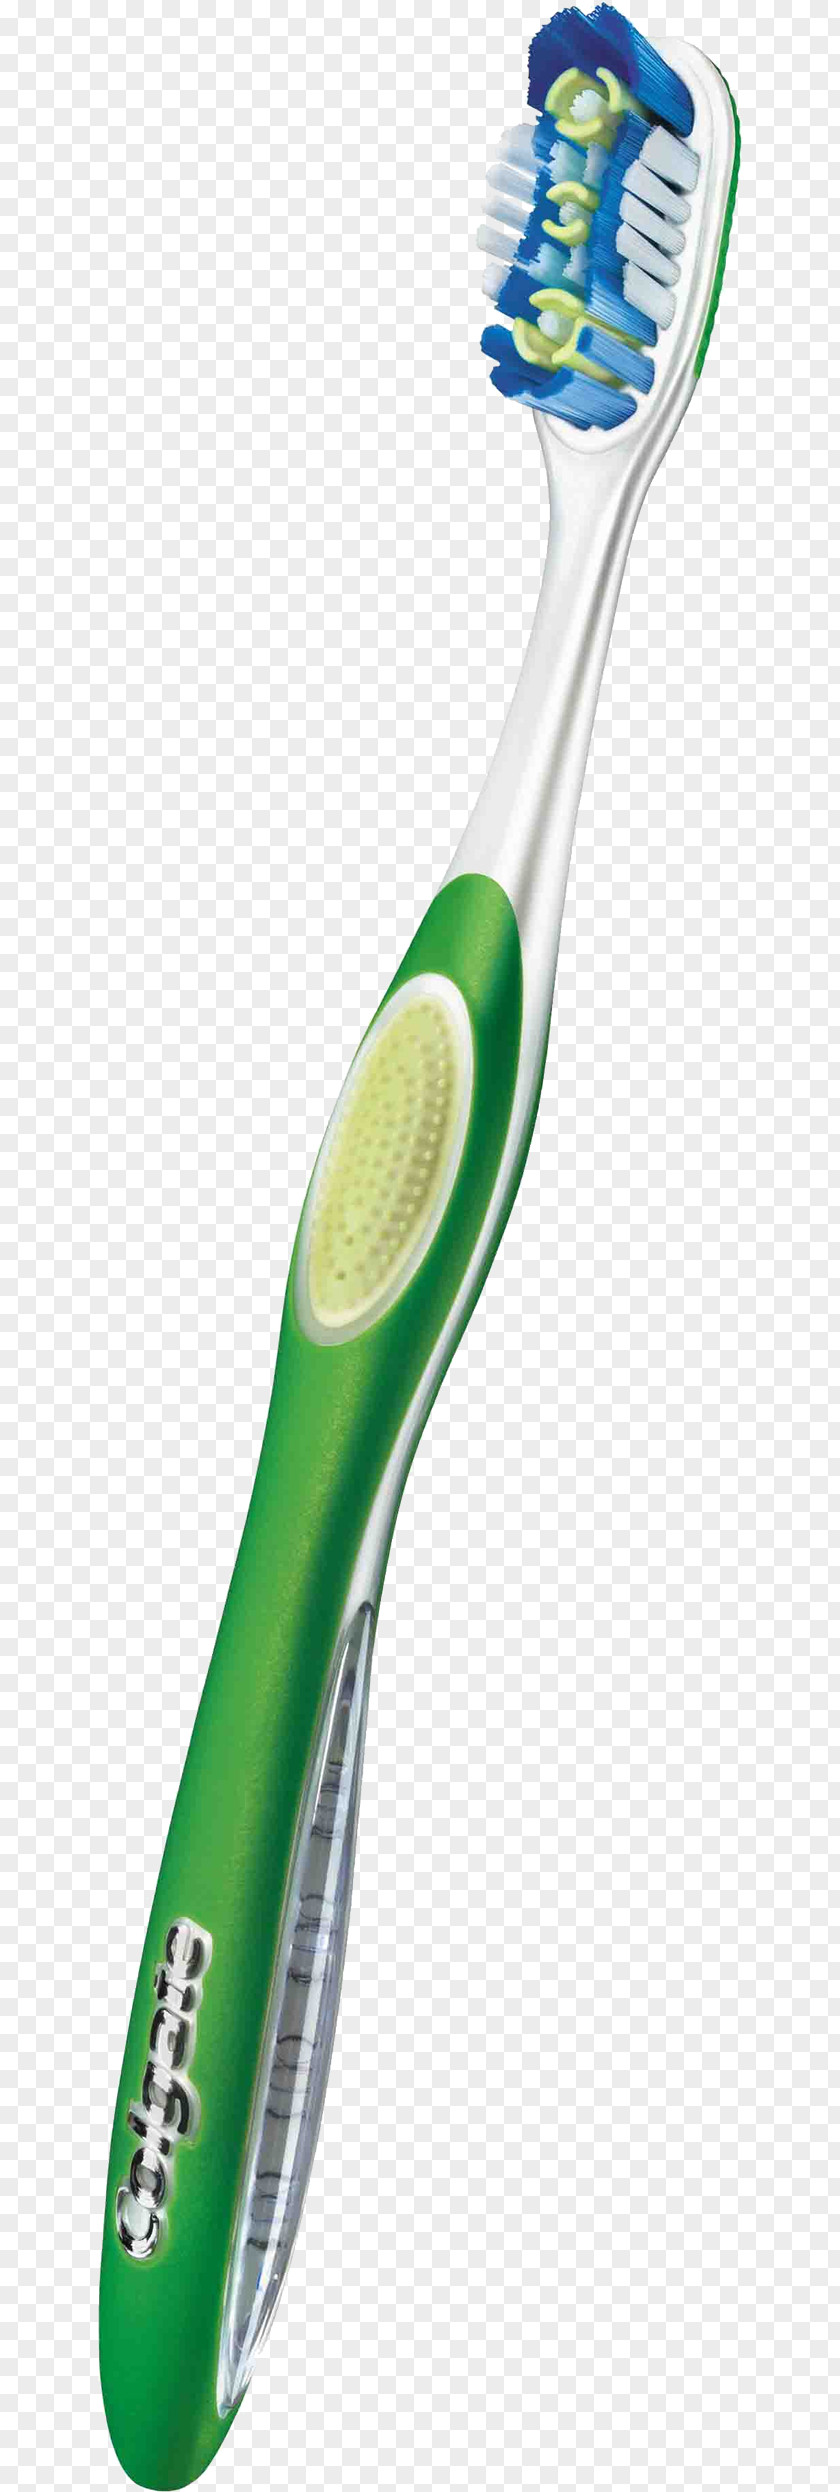 Toothbrash Image Toothbrush Colgate PhotoScape PNG